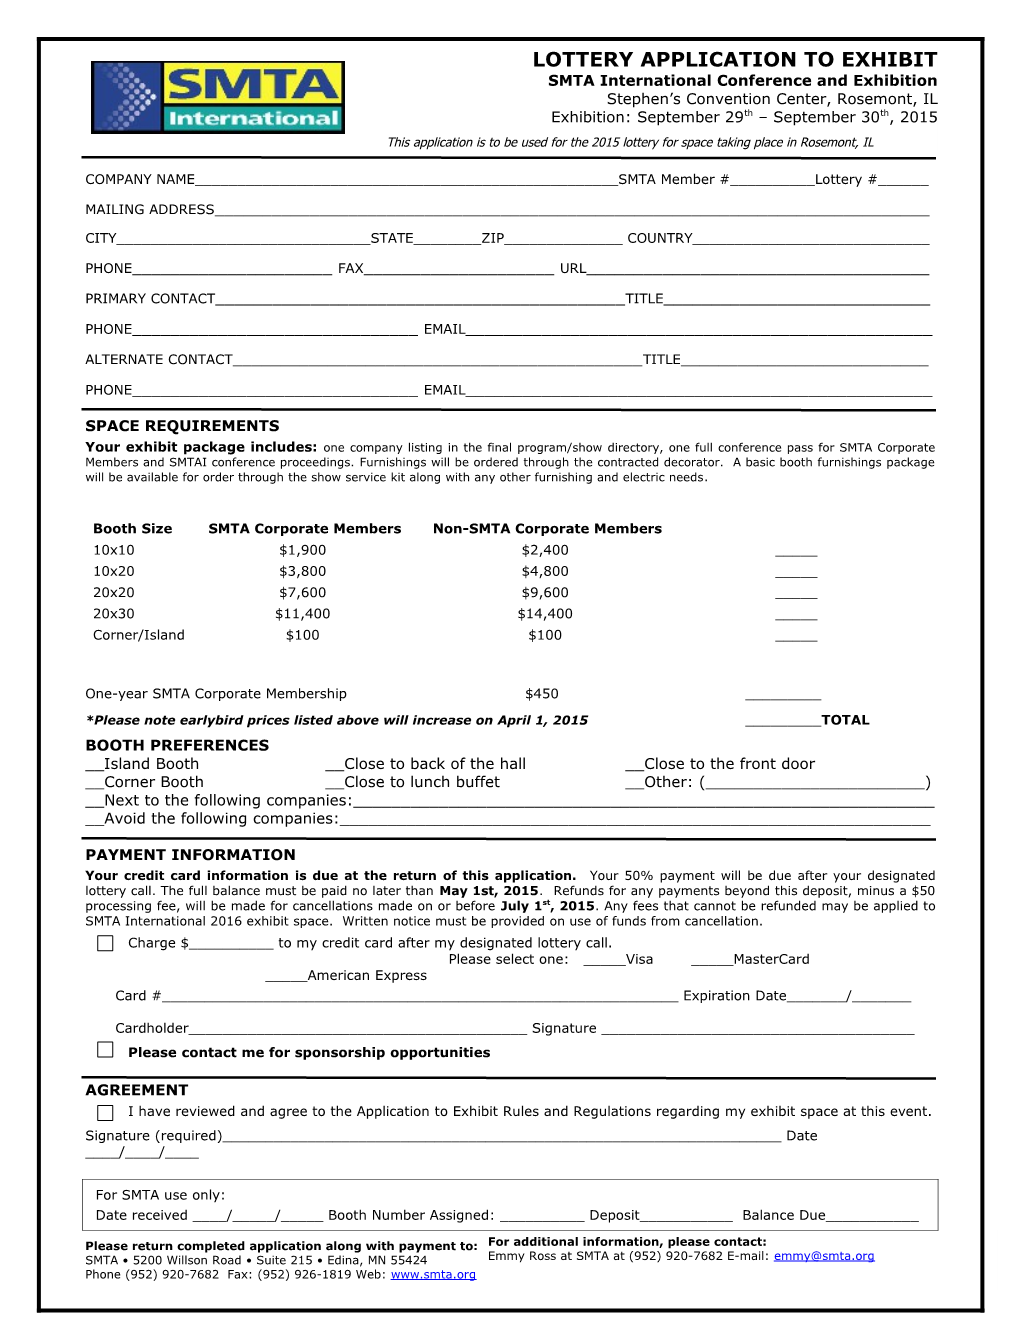 This Application Is to Be Used for the 2015 Lottery for Space Taking Place in Rosemont, IL